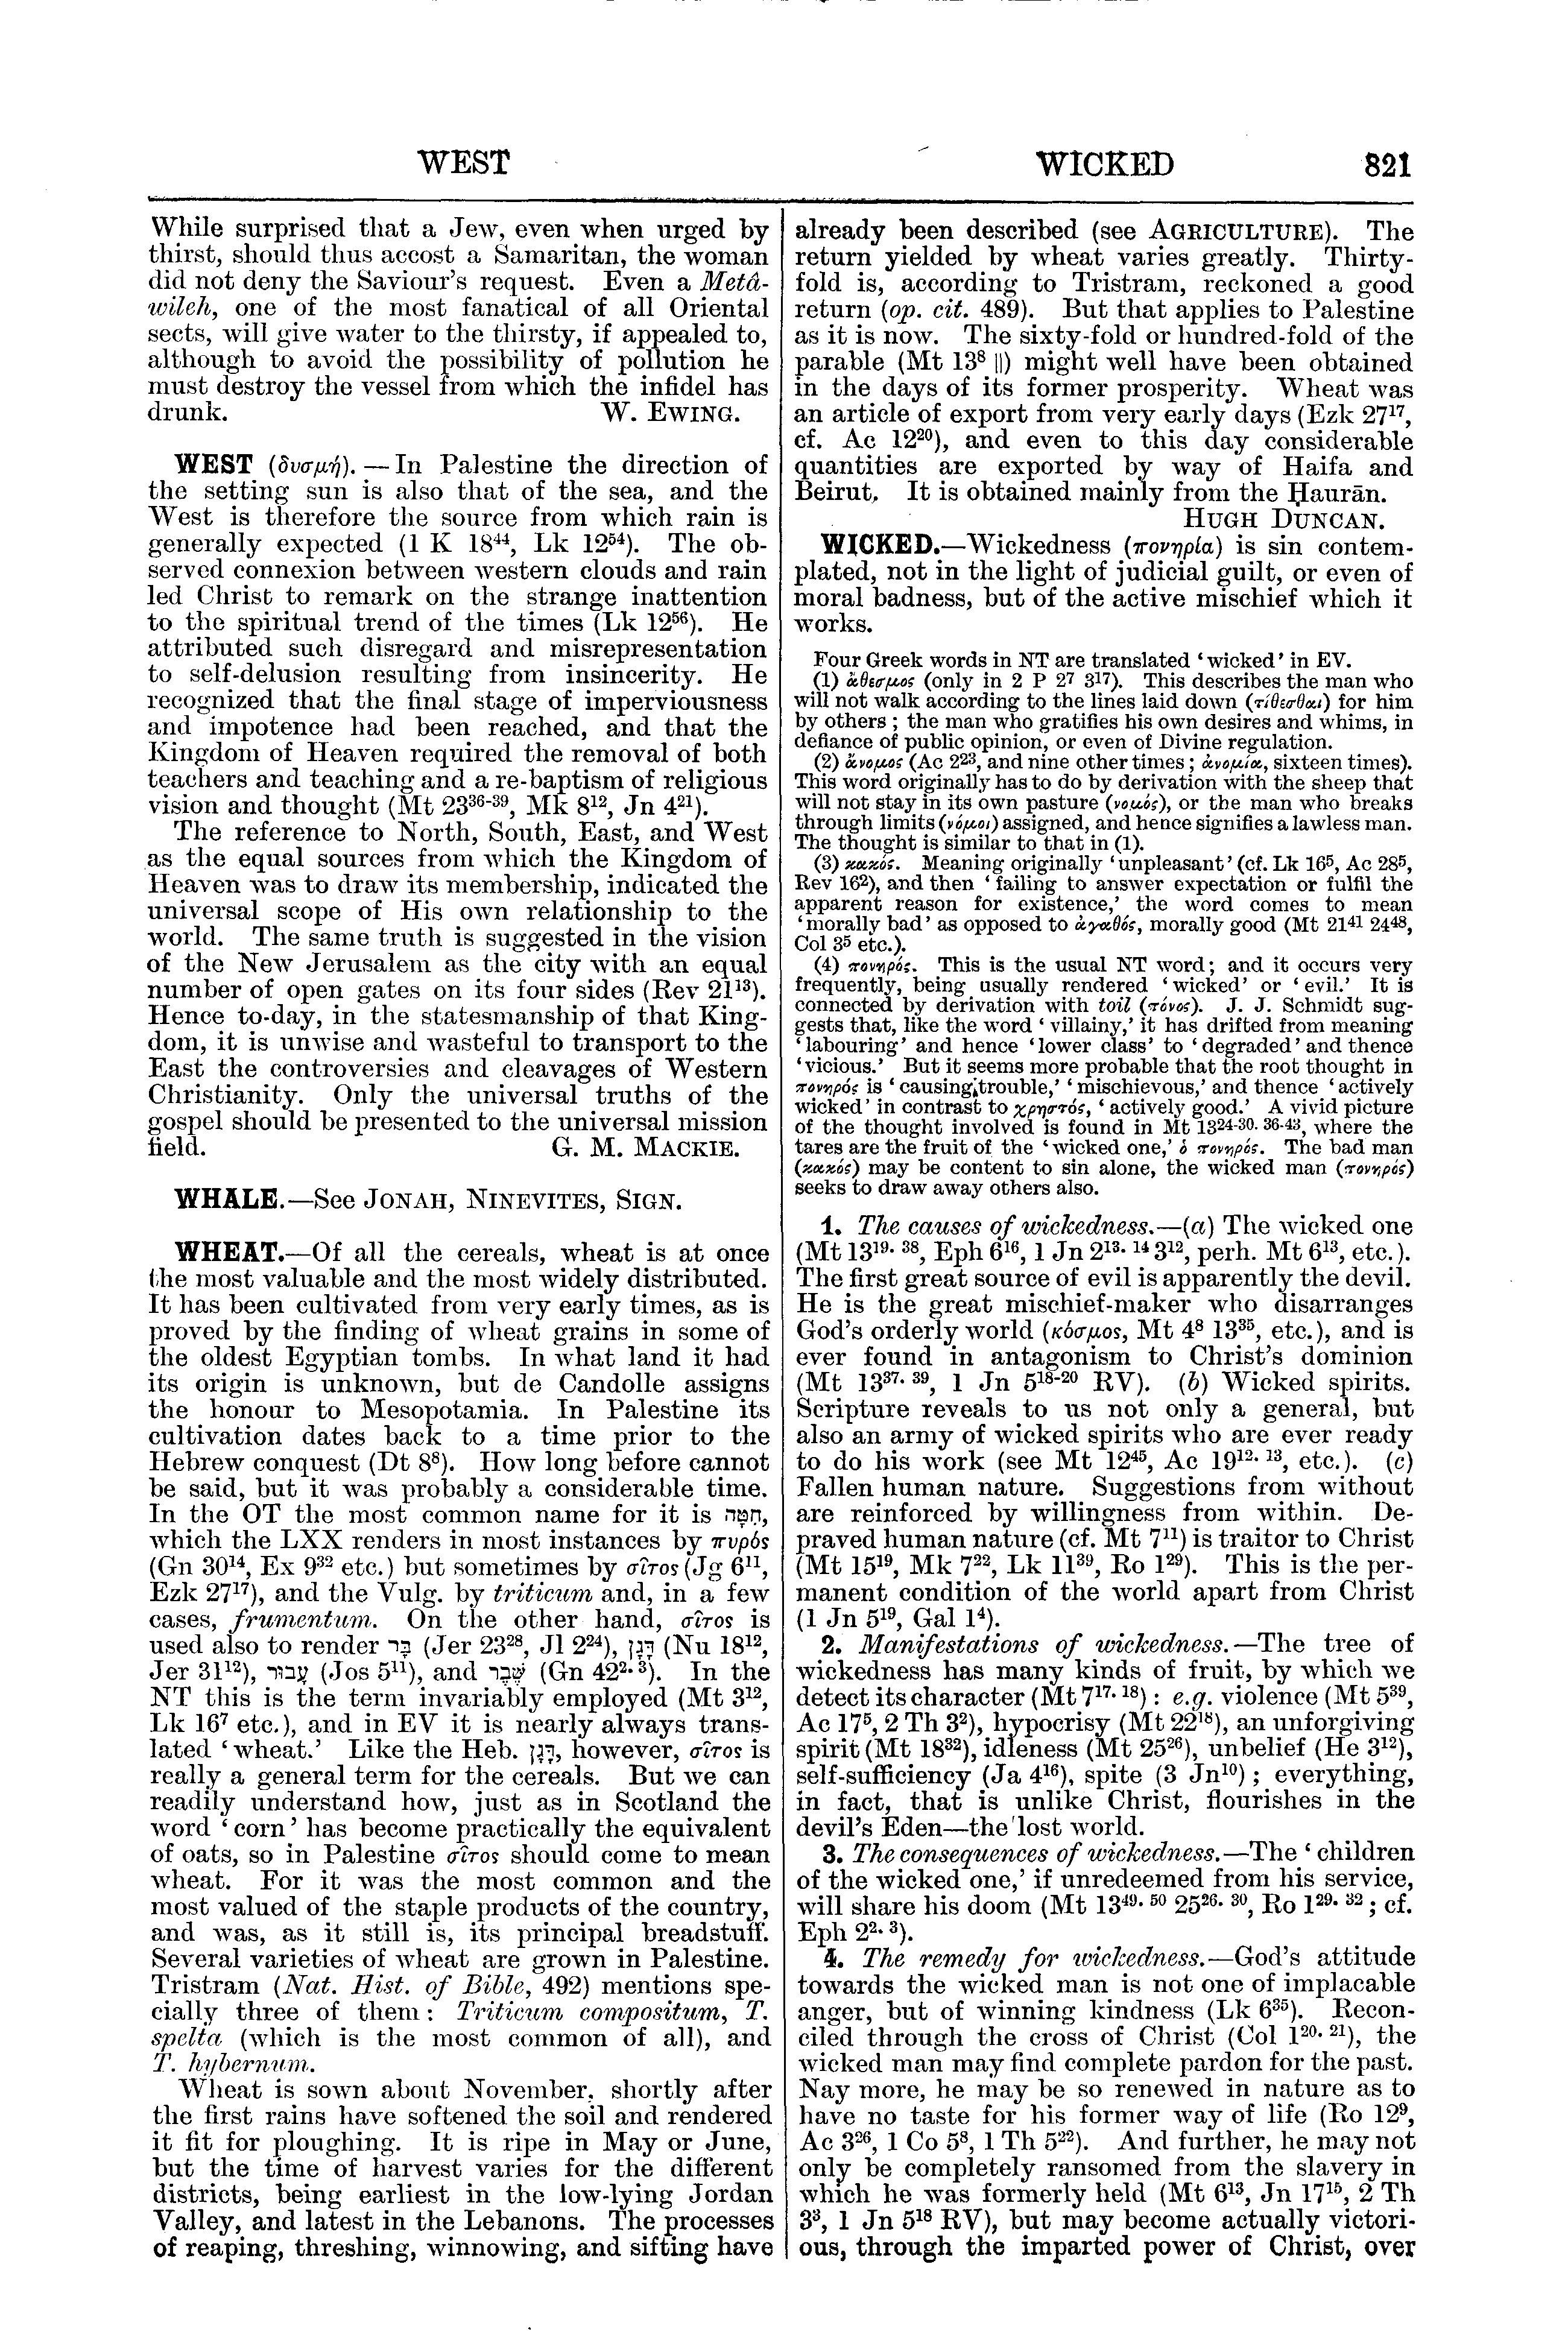 Image of page 821